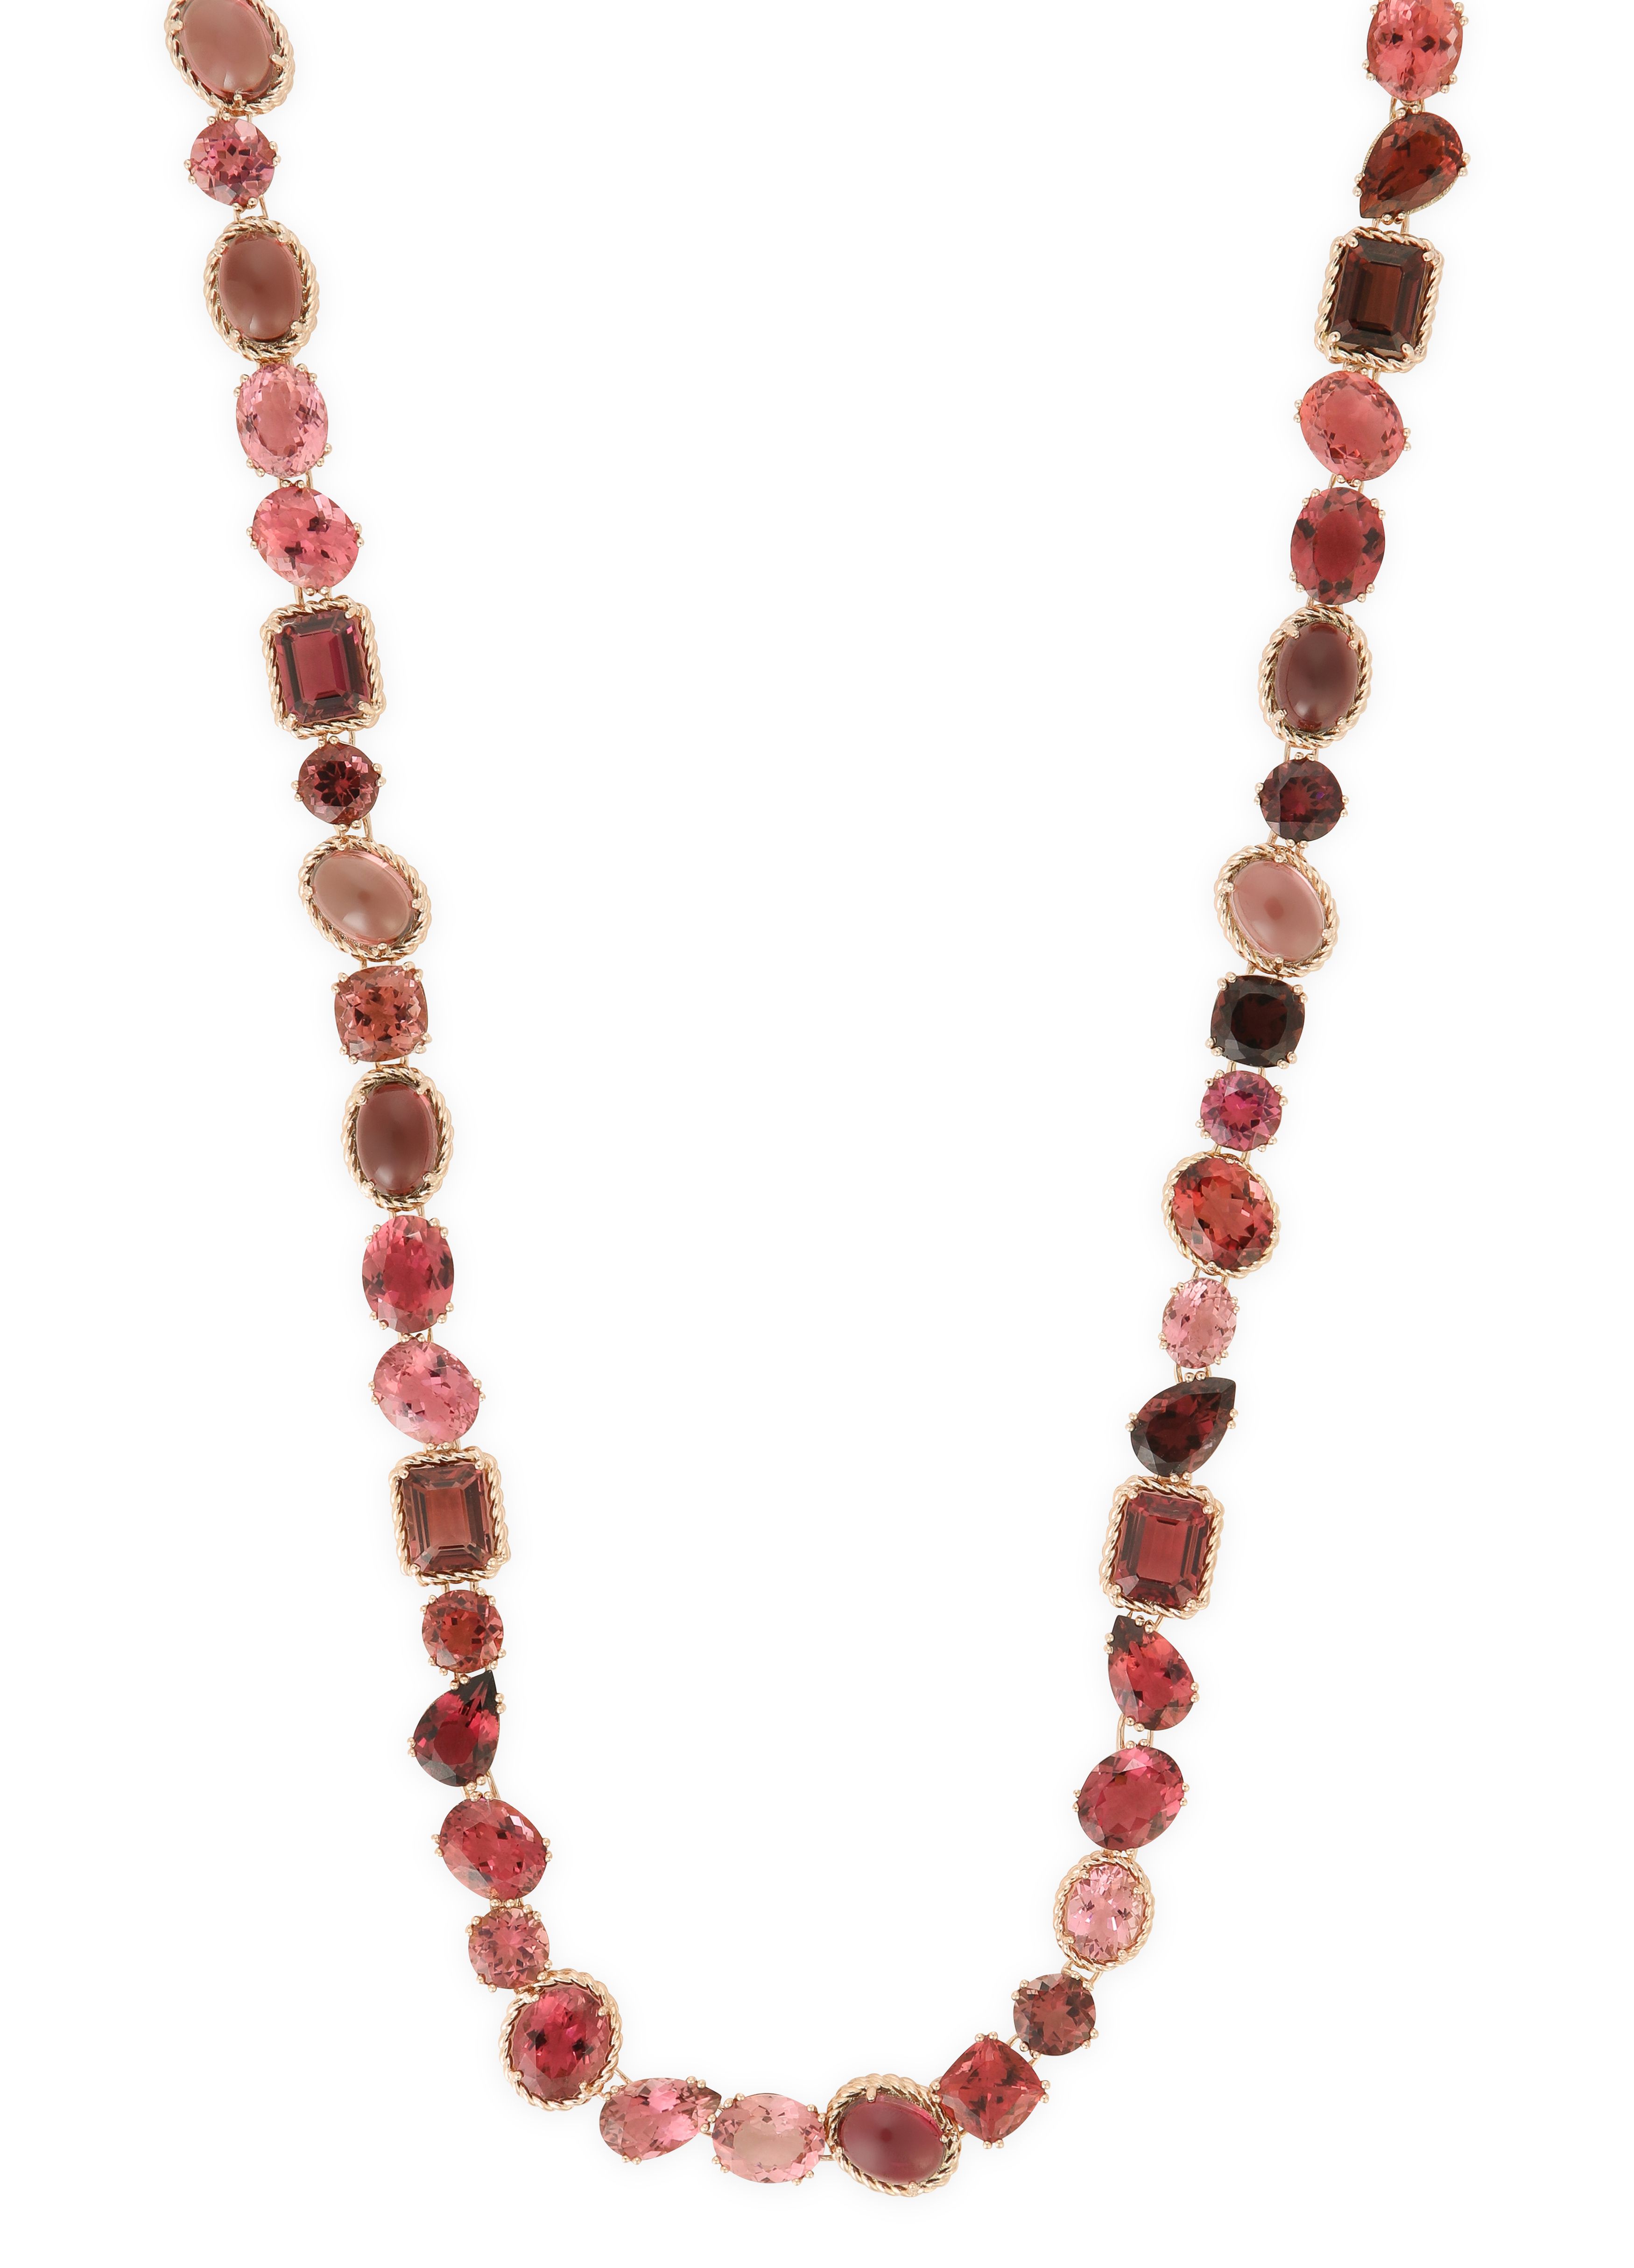 Dolce & Gabbana Anna necklace in red gold 18kt